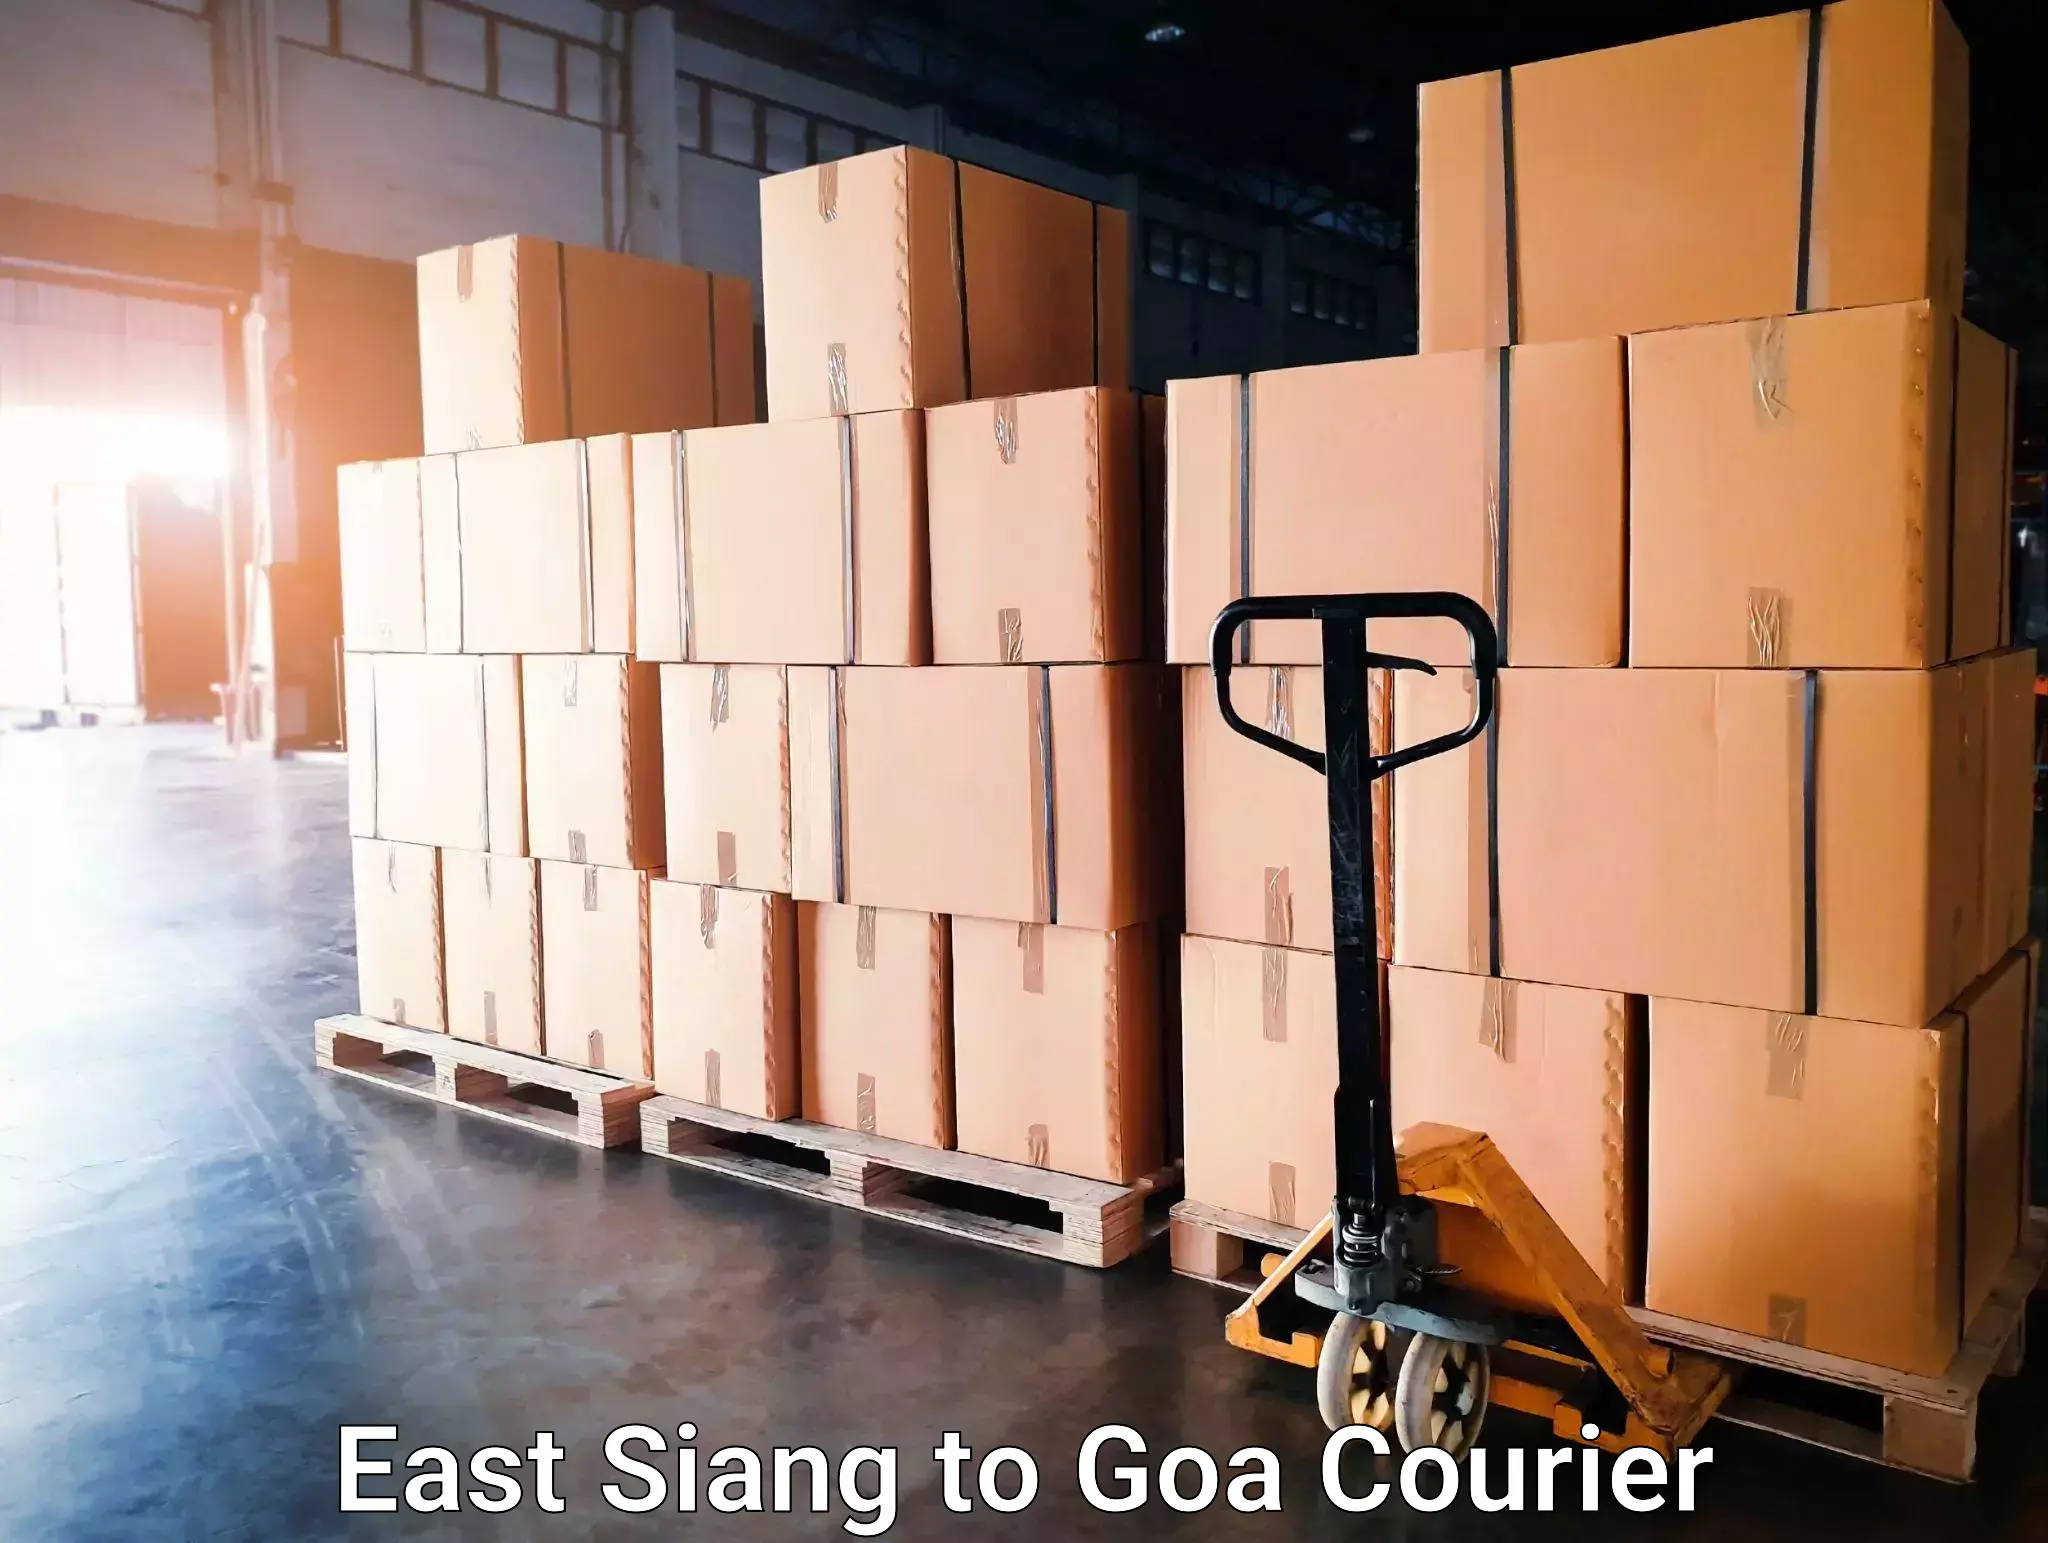 High-priority parcel service East Siang to Vasco da Gama